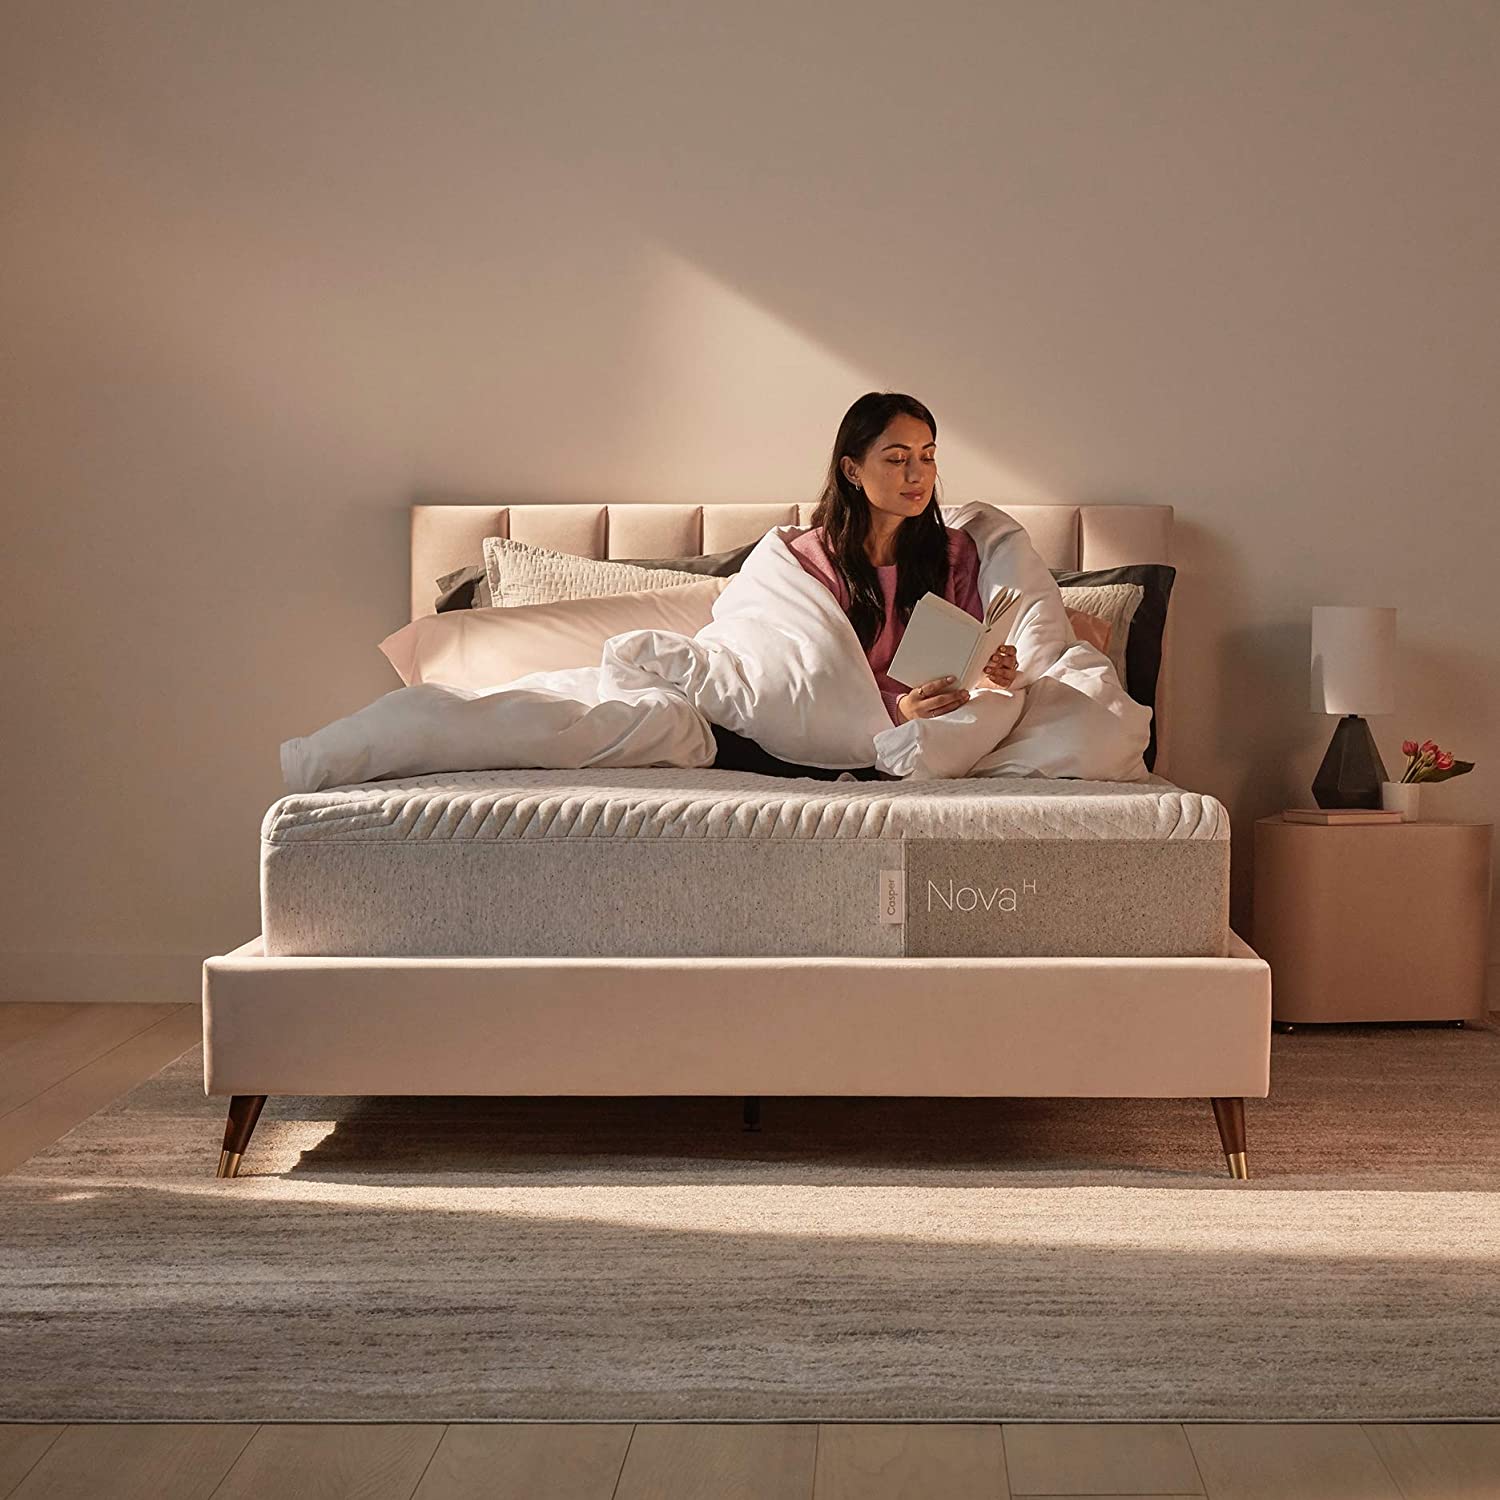 The 10 Most Expensive Mattresses in 2023 Online Mattress Review